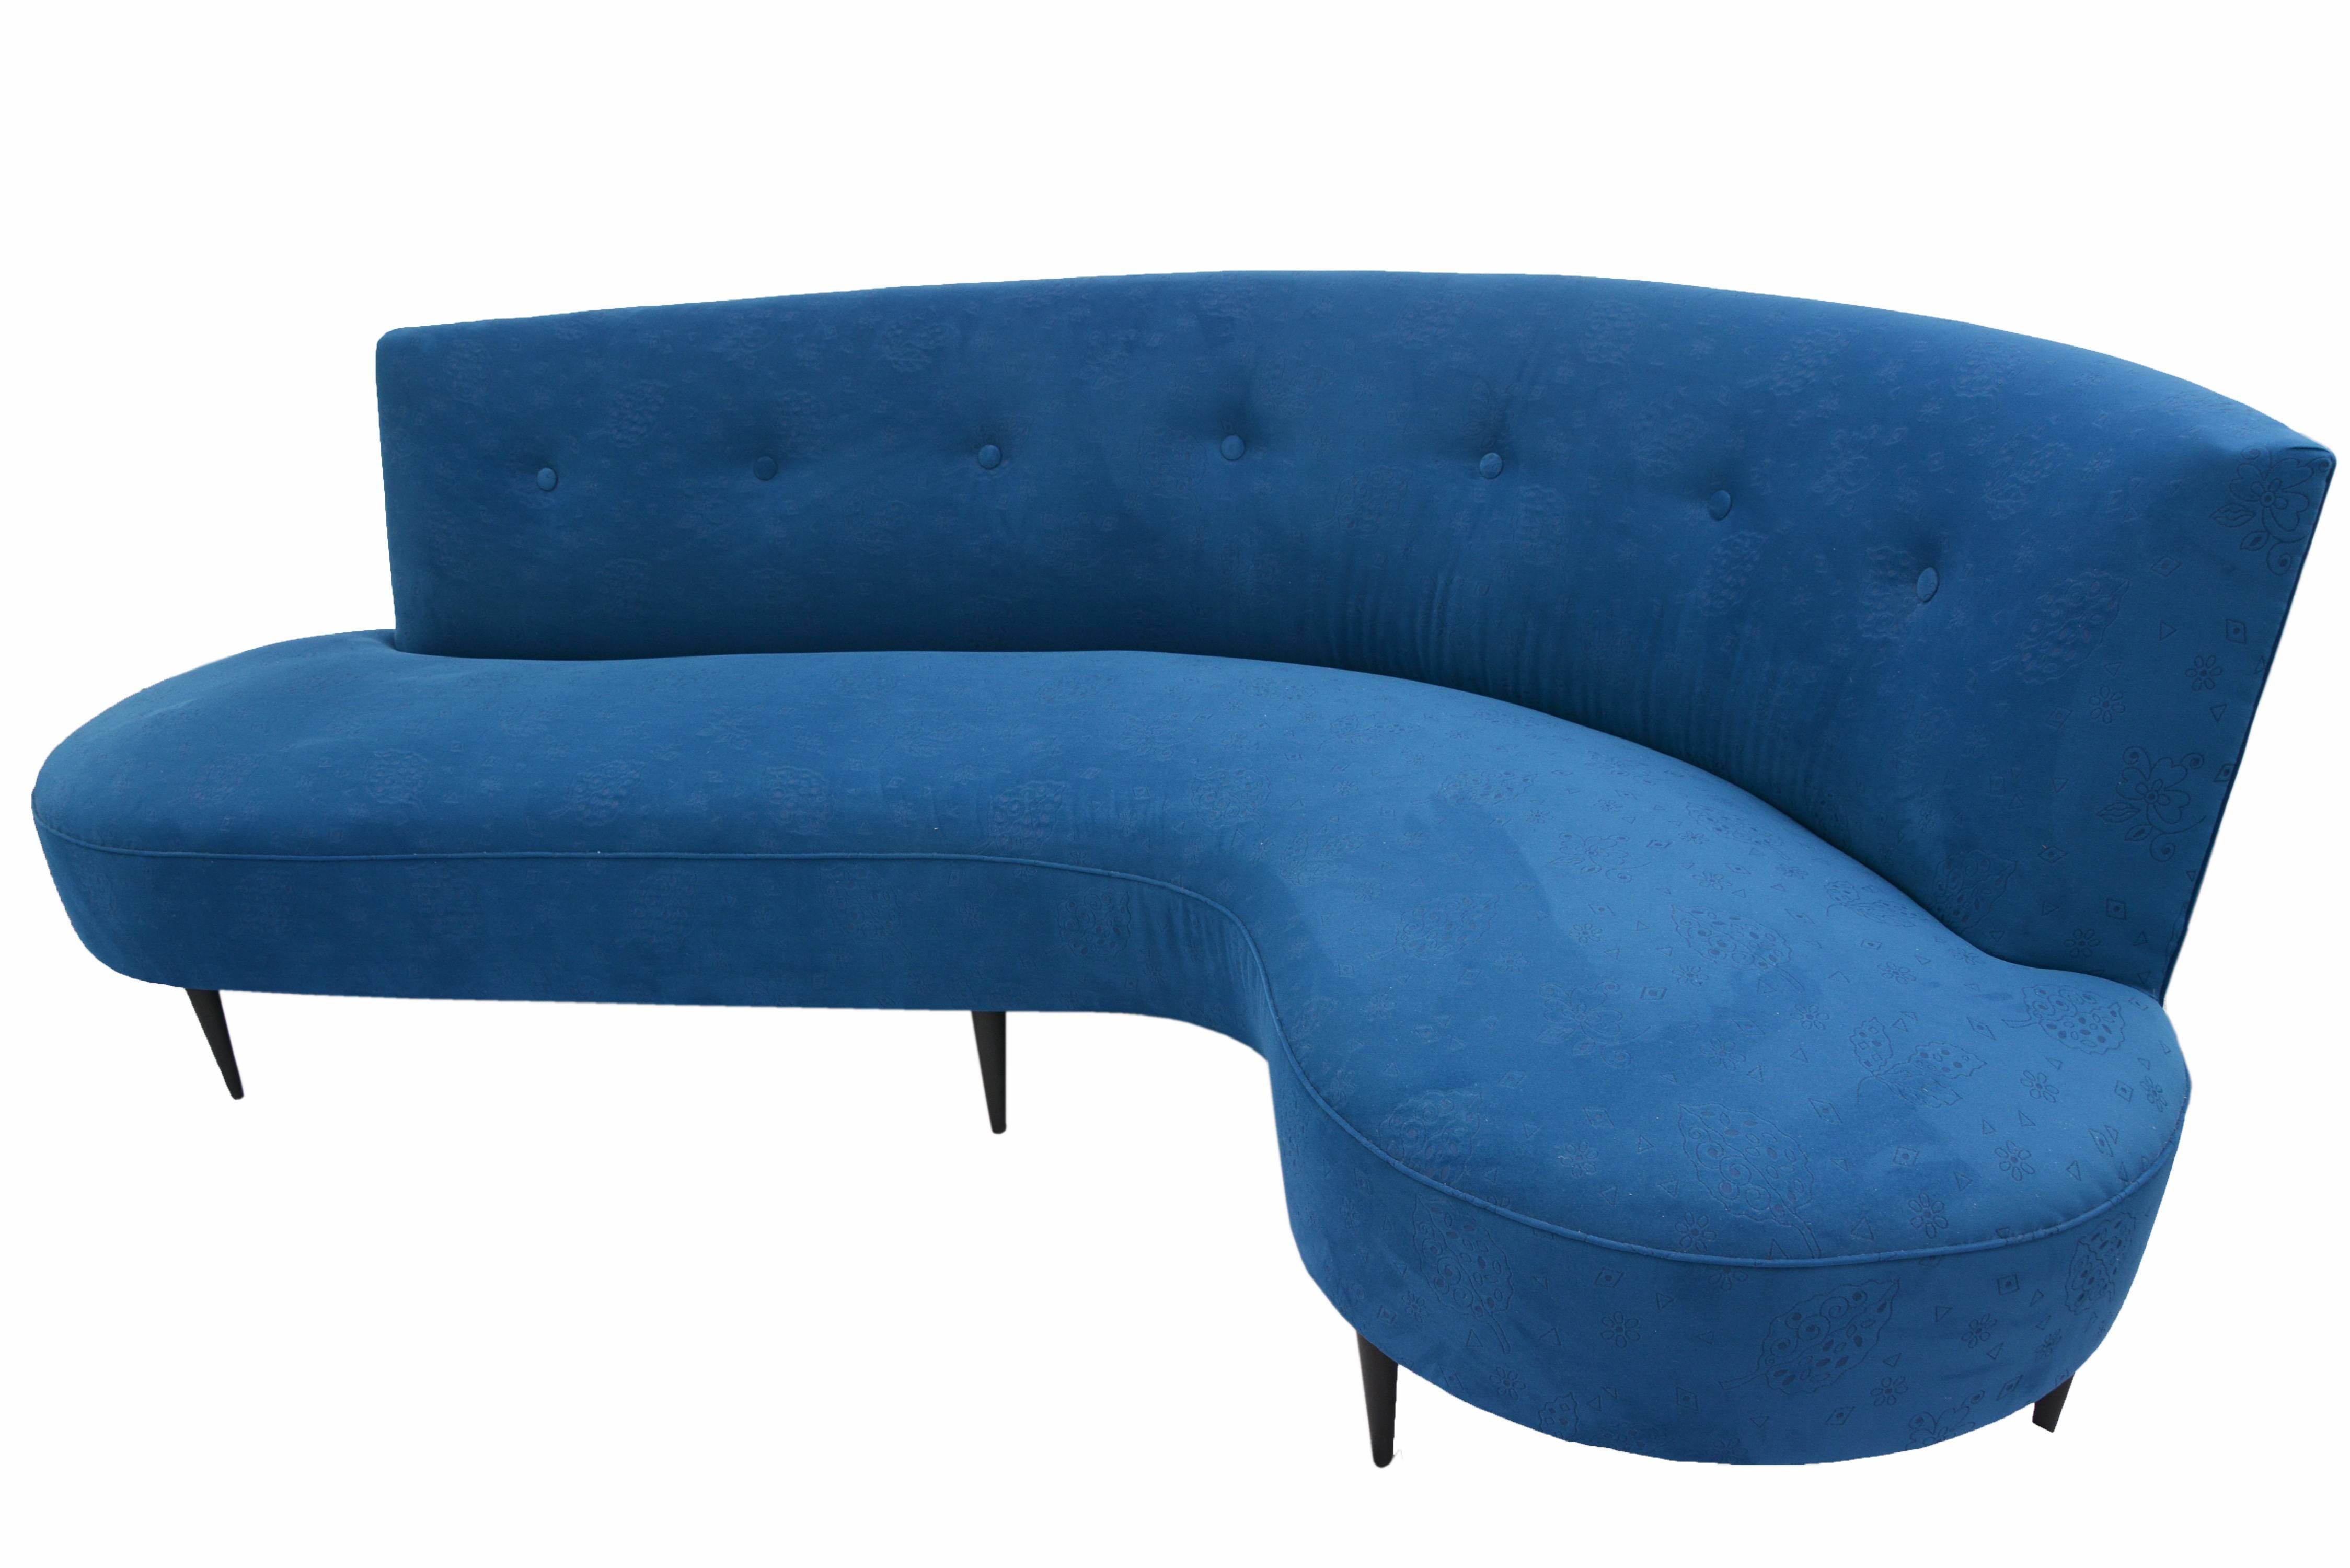 Comfortable, large and amazing curved sofa upholstered in sky blue velvet.